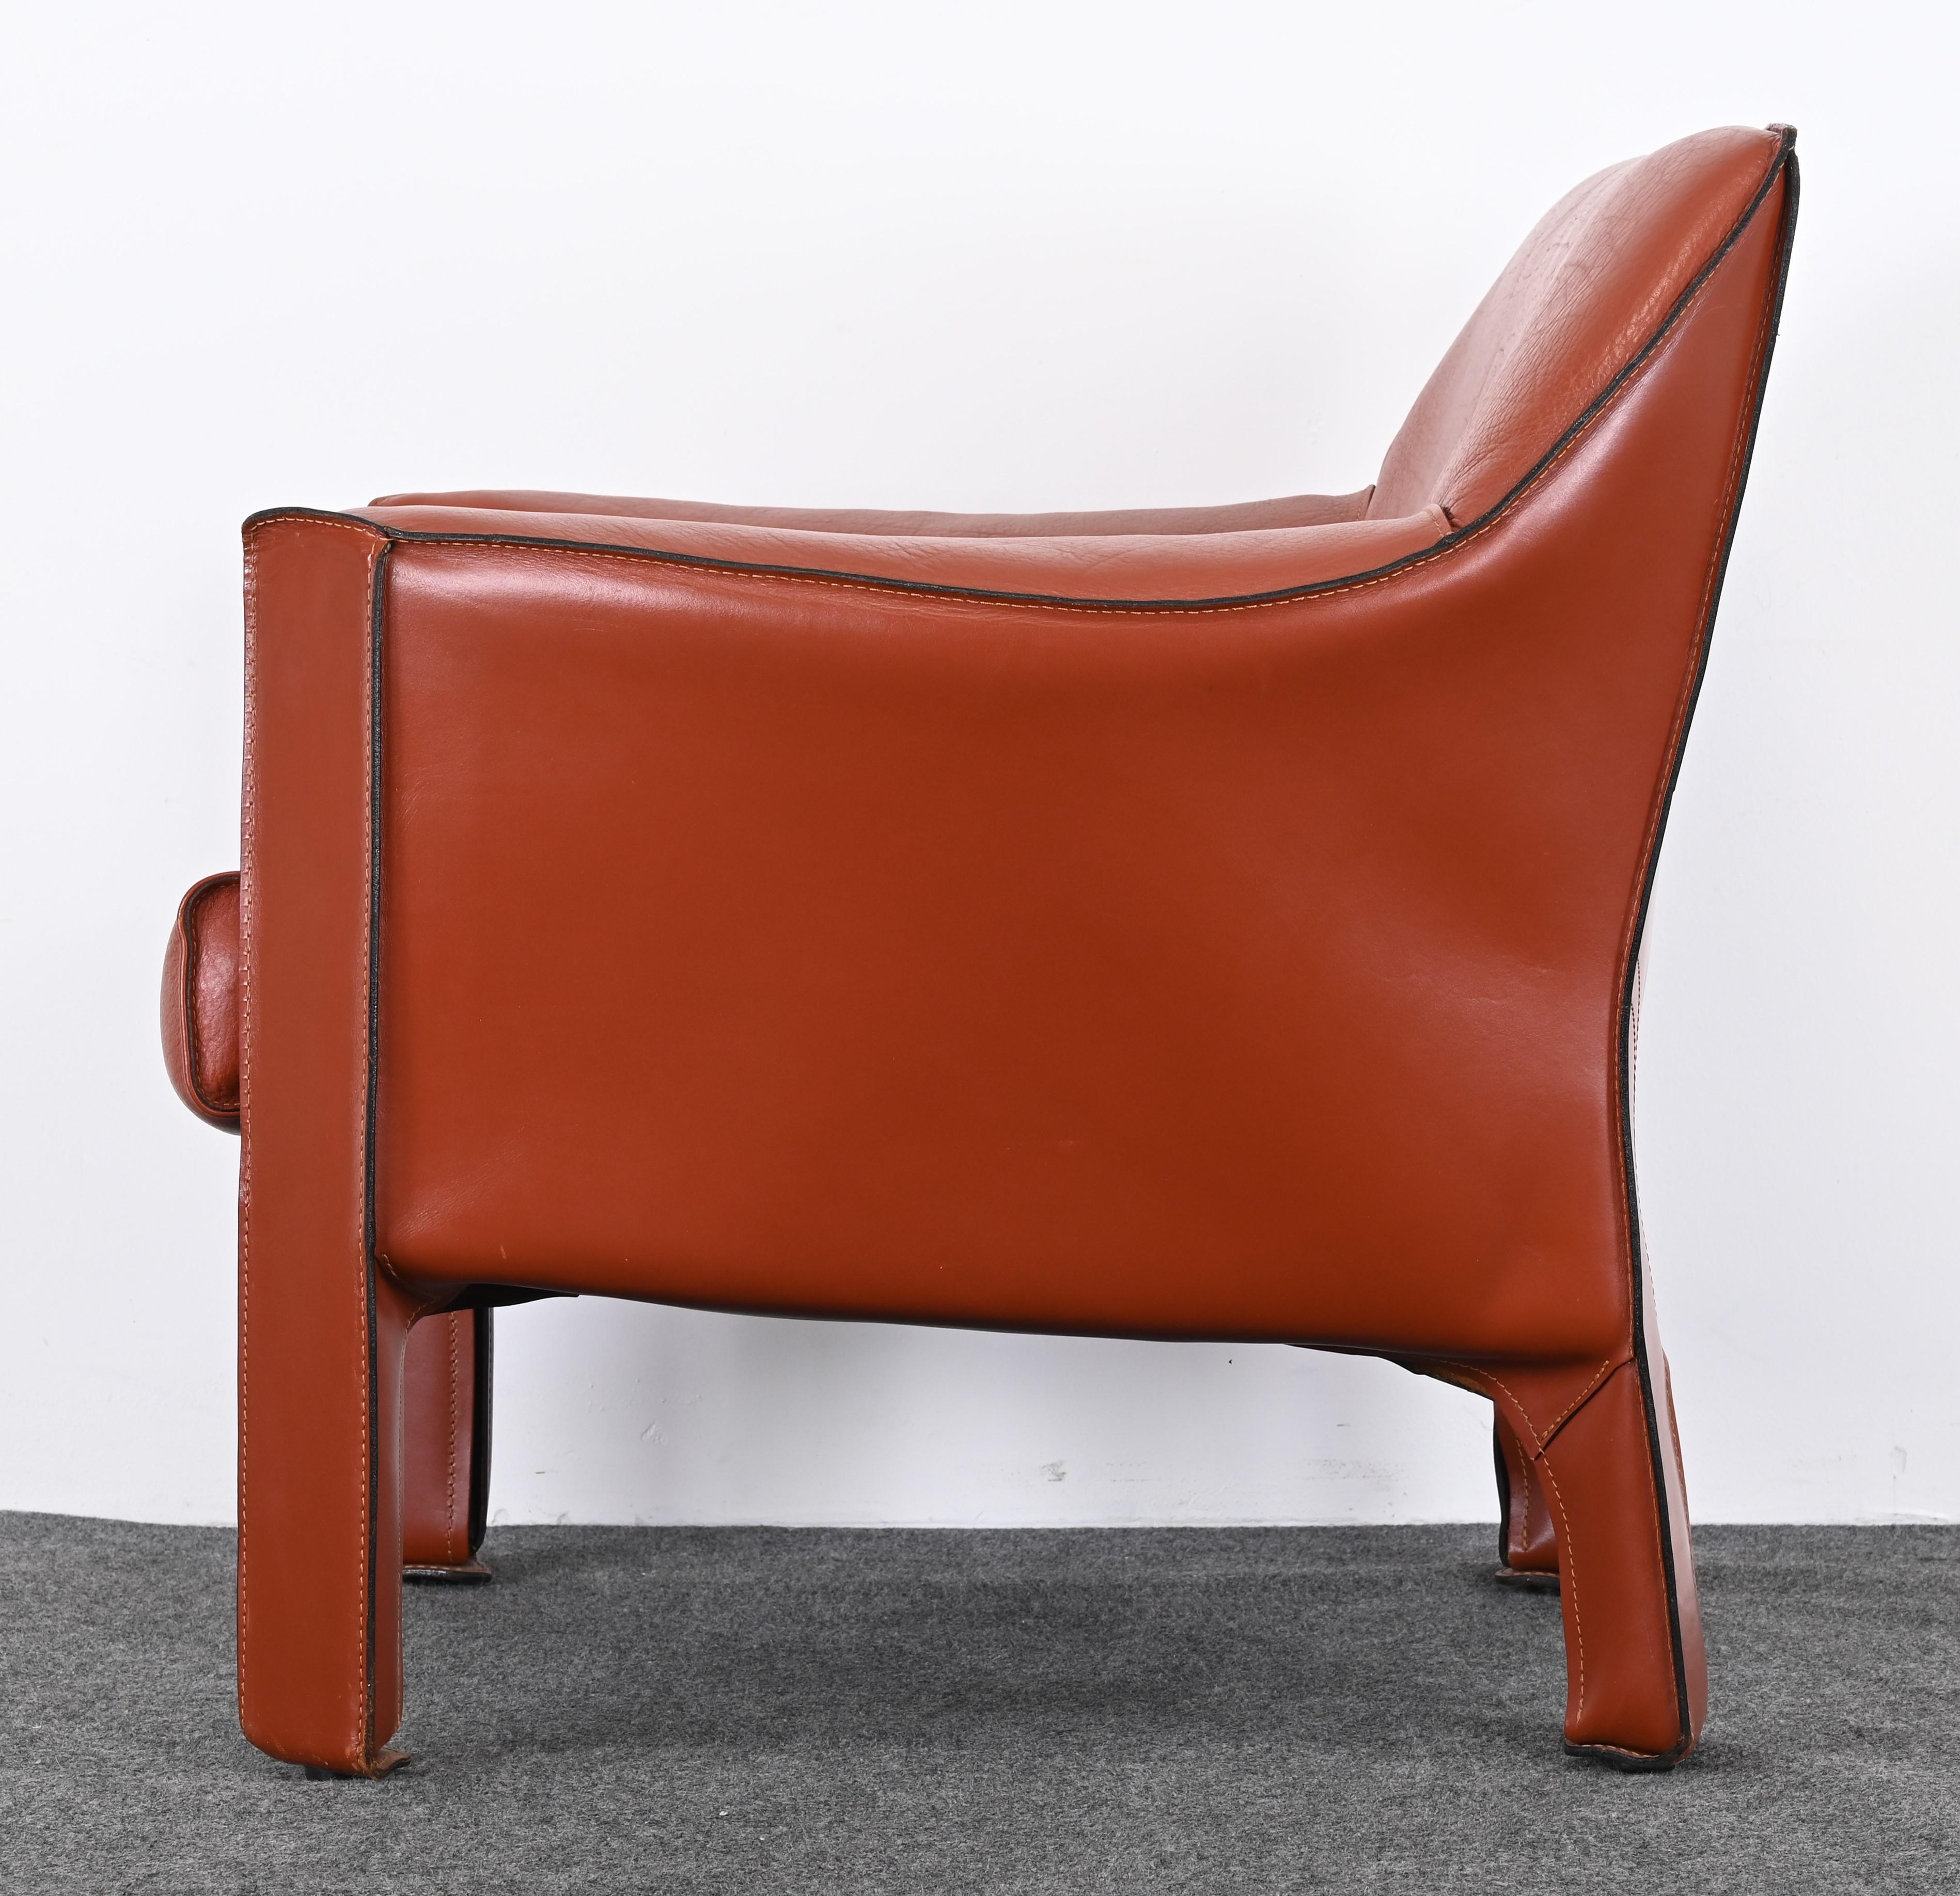 Cassina Cab Chair 415 Designed by Mario Bellini, No Longer in Production 4